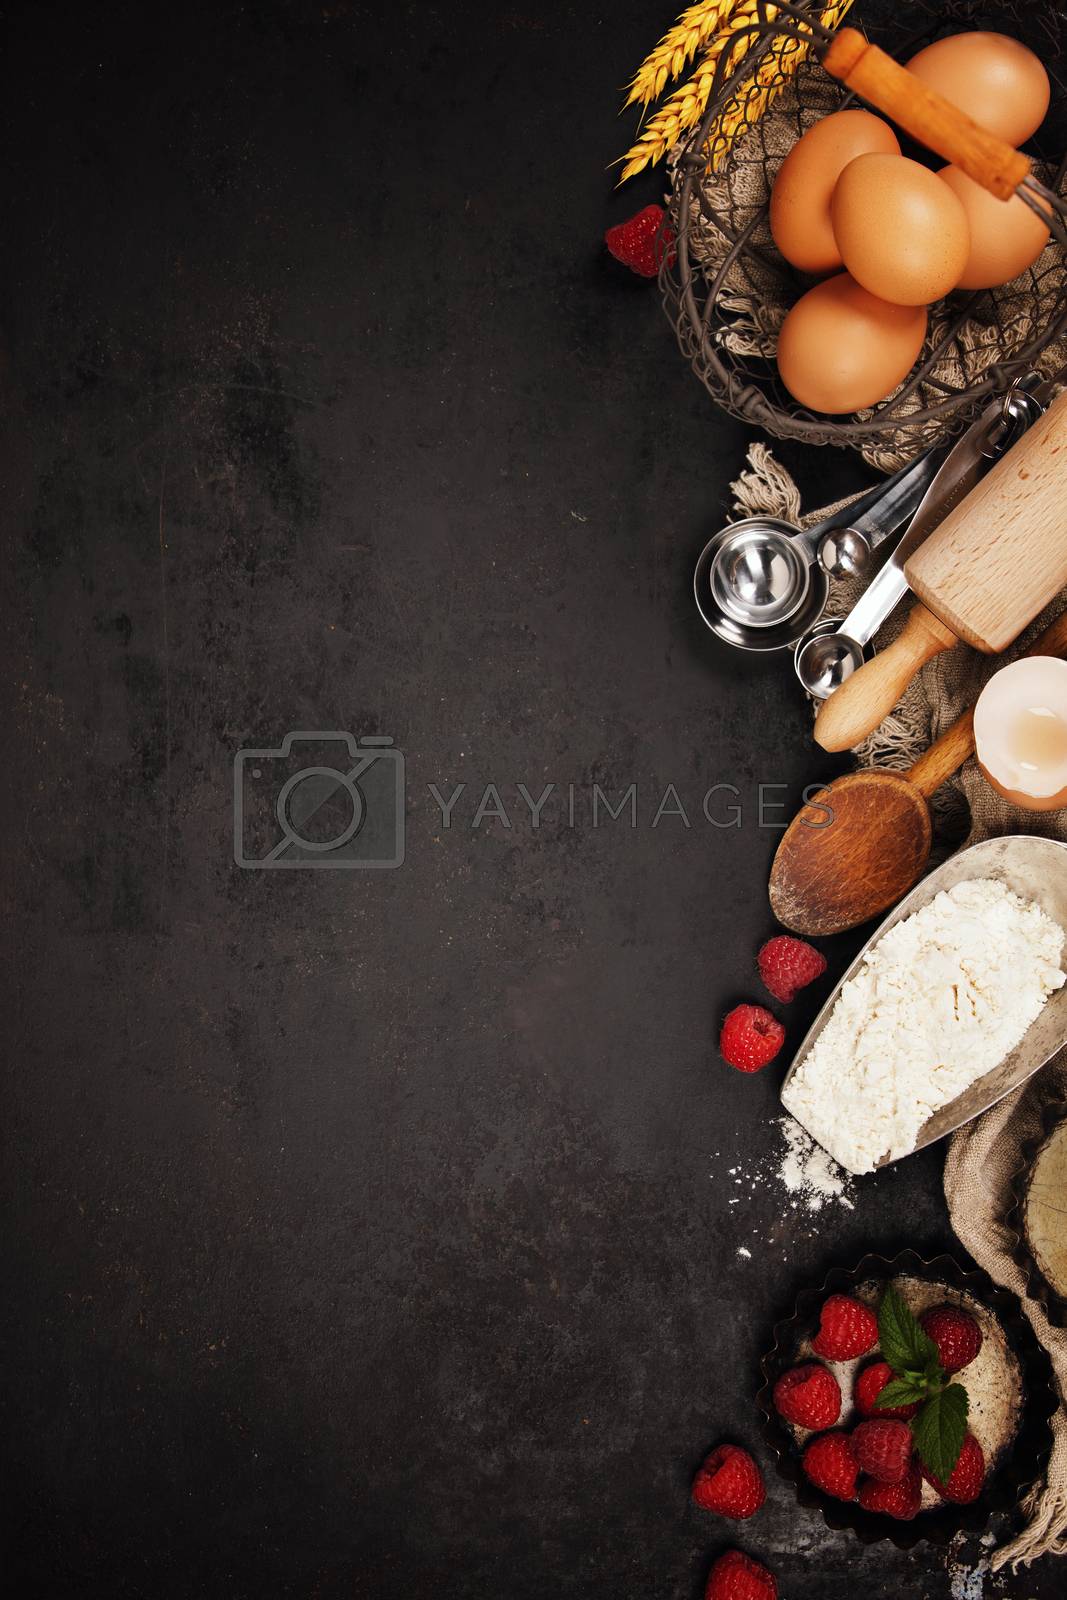 Baking tools and ingredients - flour, eggs, rolling pin, measuring spoons  on vintage table. Top view. Rustic background with free text space